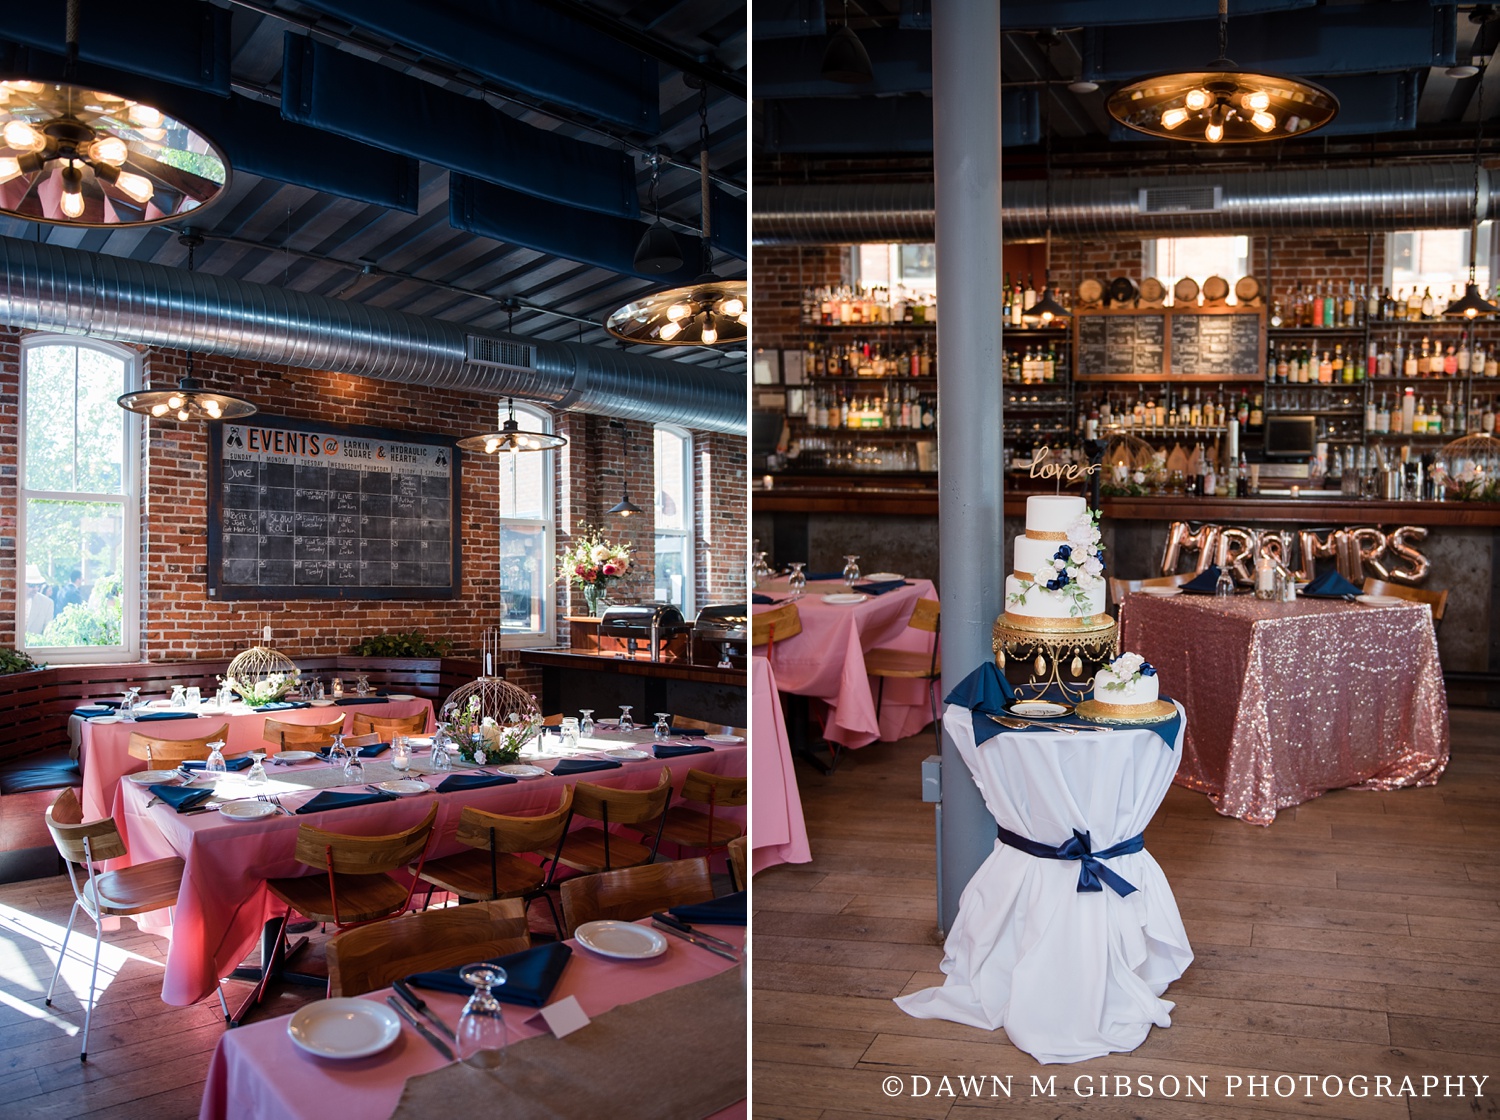 Brittany + Joel's Wedding Day | Photos by Dawn M Gibson Photography